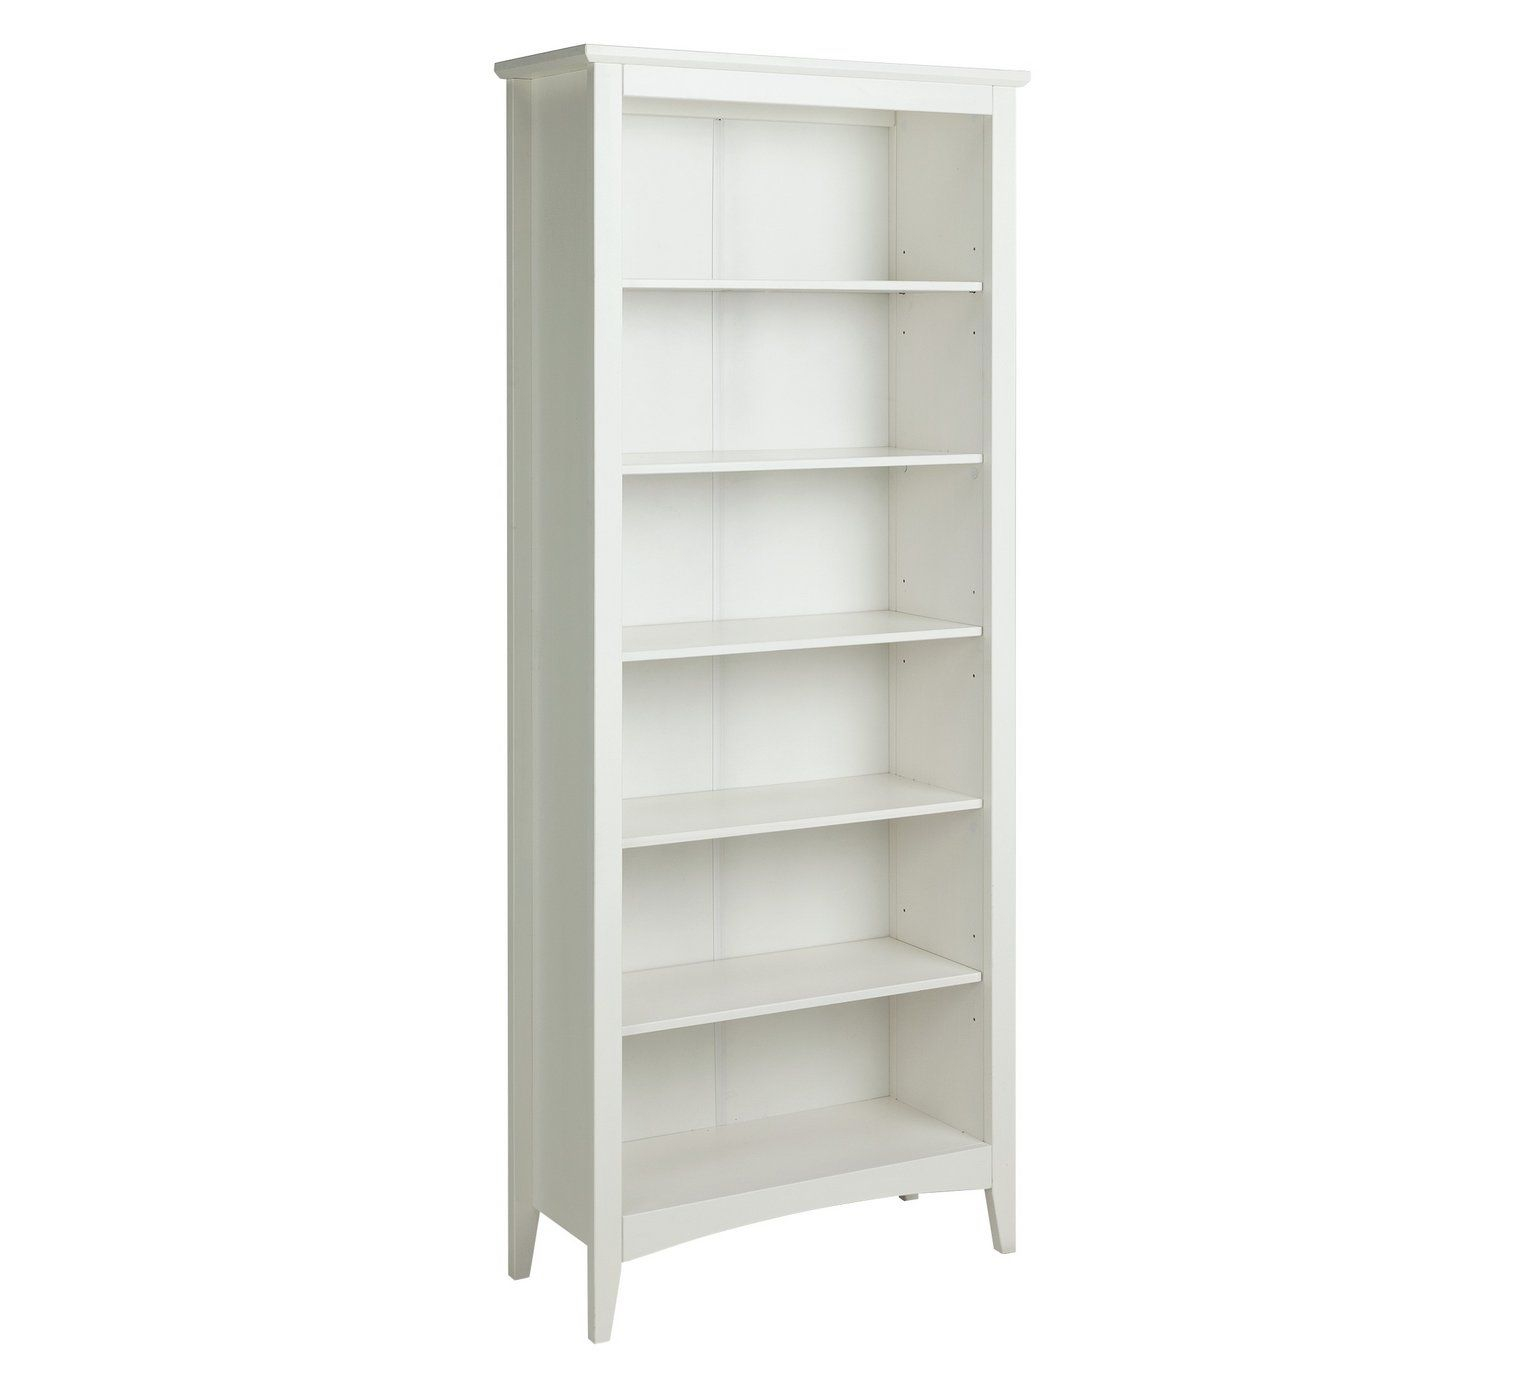 Home Camborne 5 Shelf Solid Wood Bookcase White Shelves within dimensions 1536 X 1382